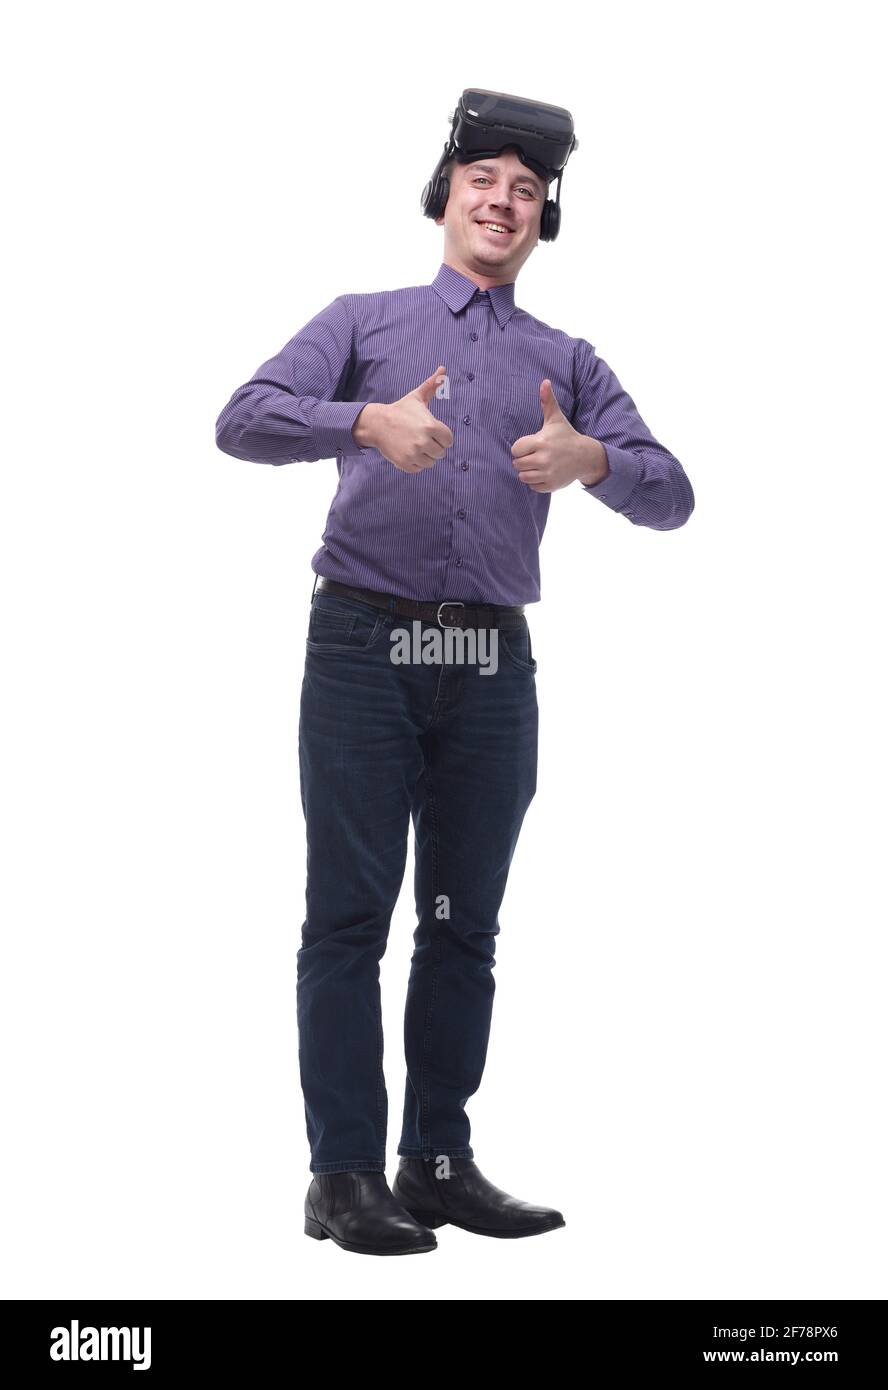 Joyful man giving two thumbs up after using a VR headset Stock Photo